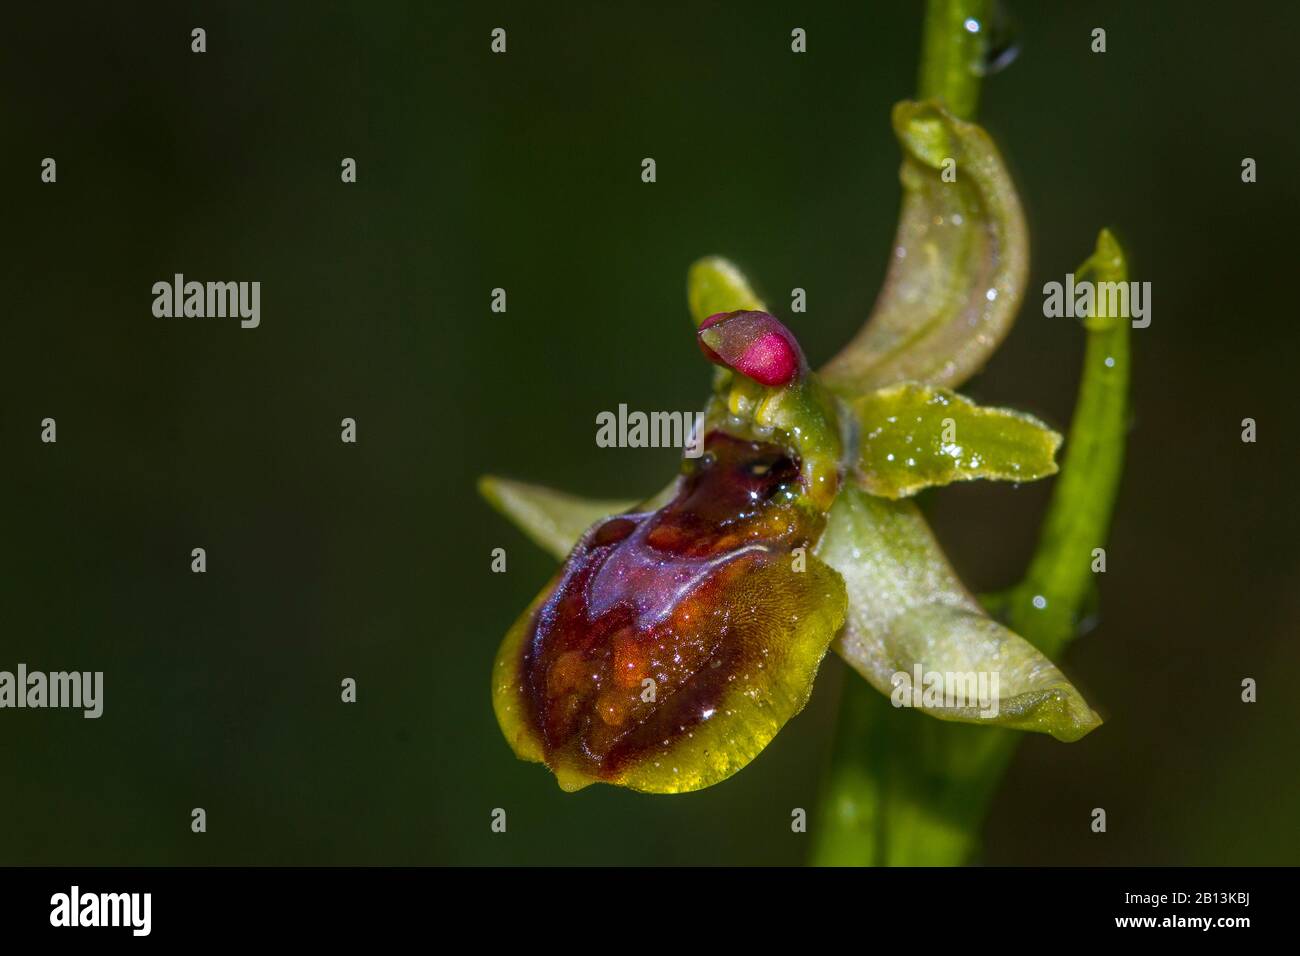 small spider ophrys (Ophrys araneola), flower with drops of water, Germany, Baden-Wuerttemberg Stock Photo